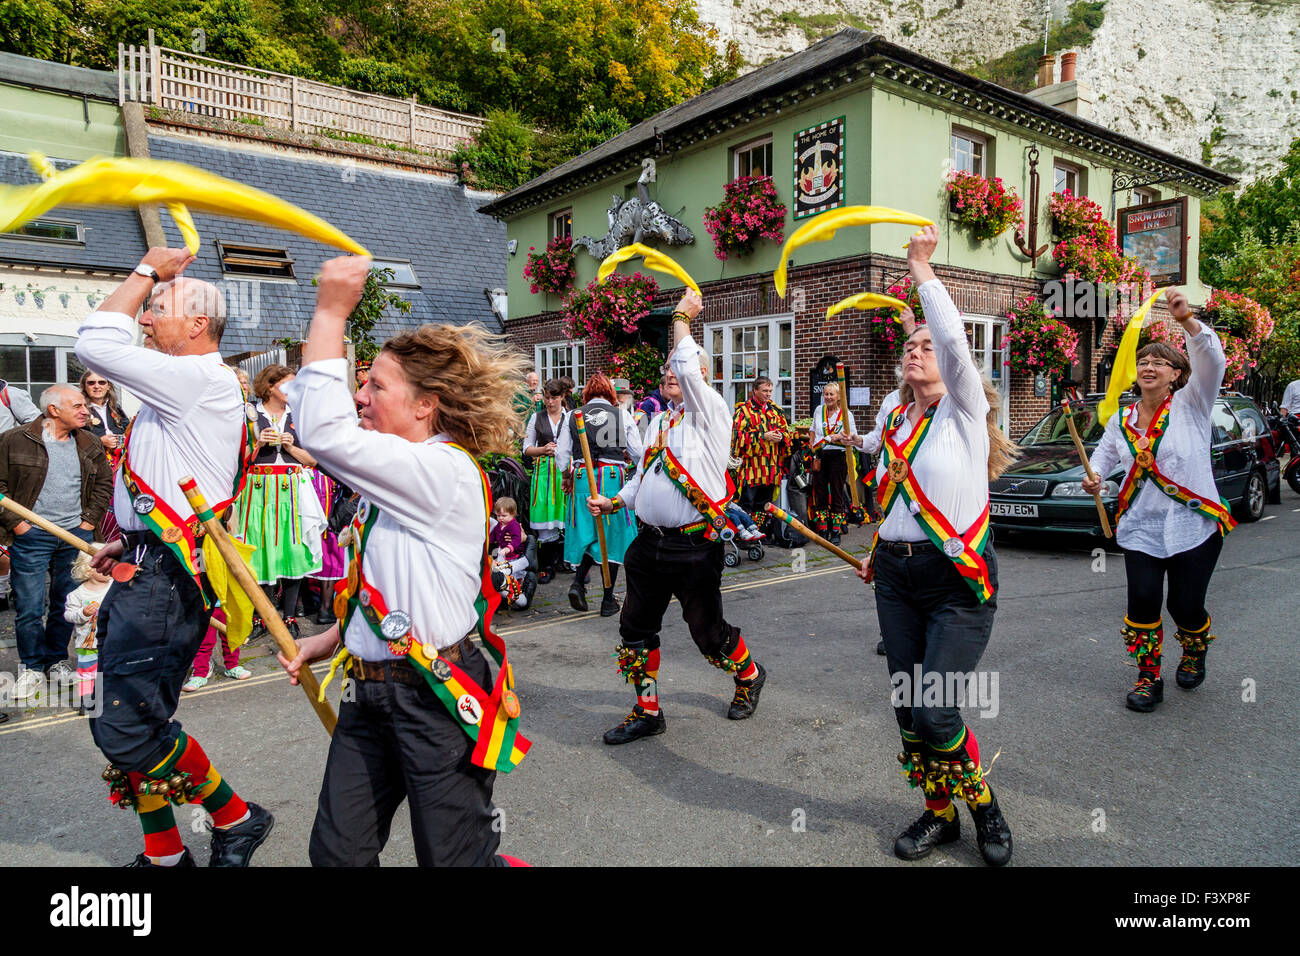 Rampant Rooster Morris Dancers Perform At The Snowdrop Pub In Lewes During The Towns Annual Folk Festival, Lewes, Sussex, UK Stock Photo